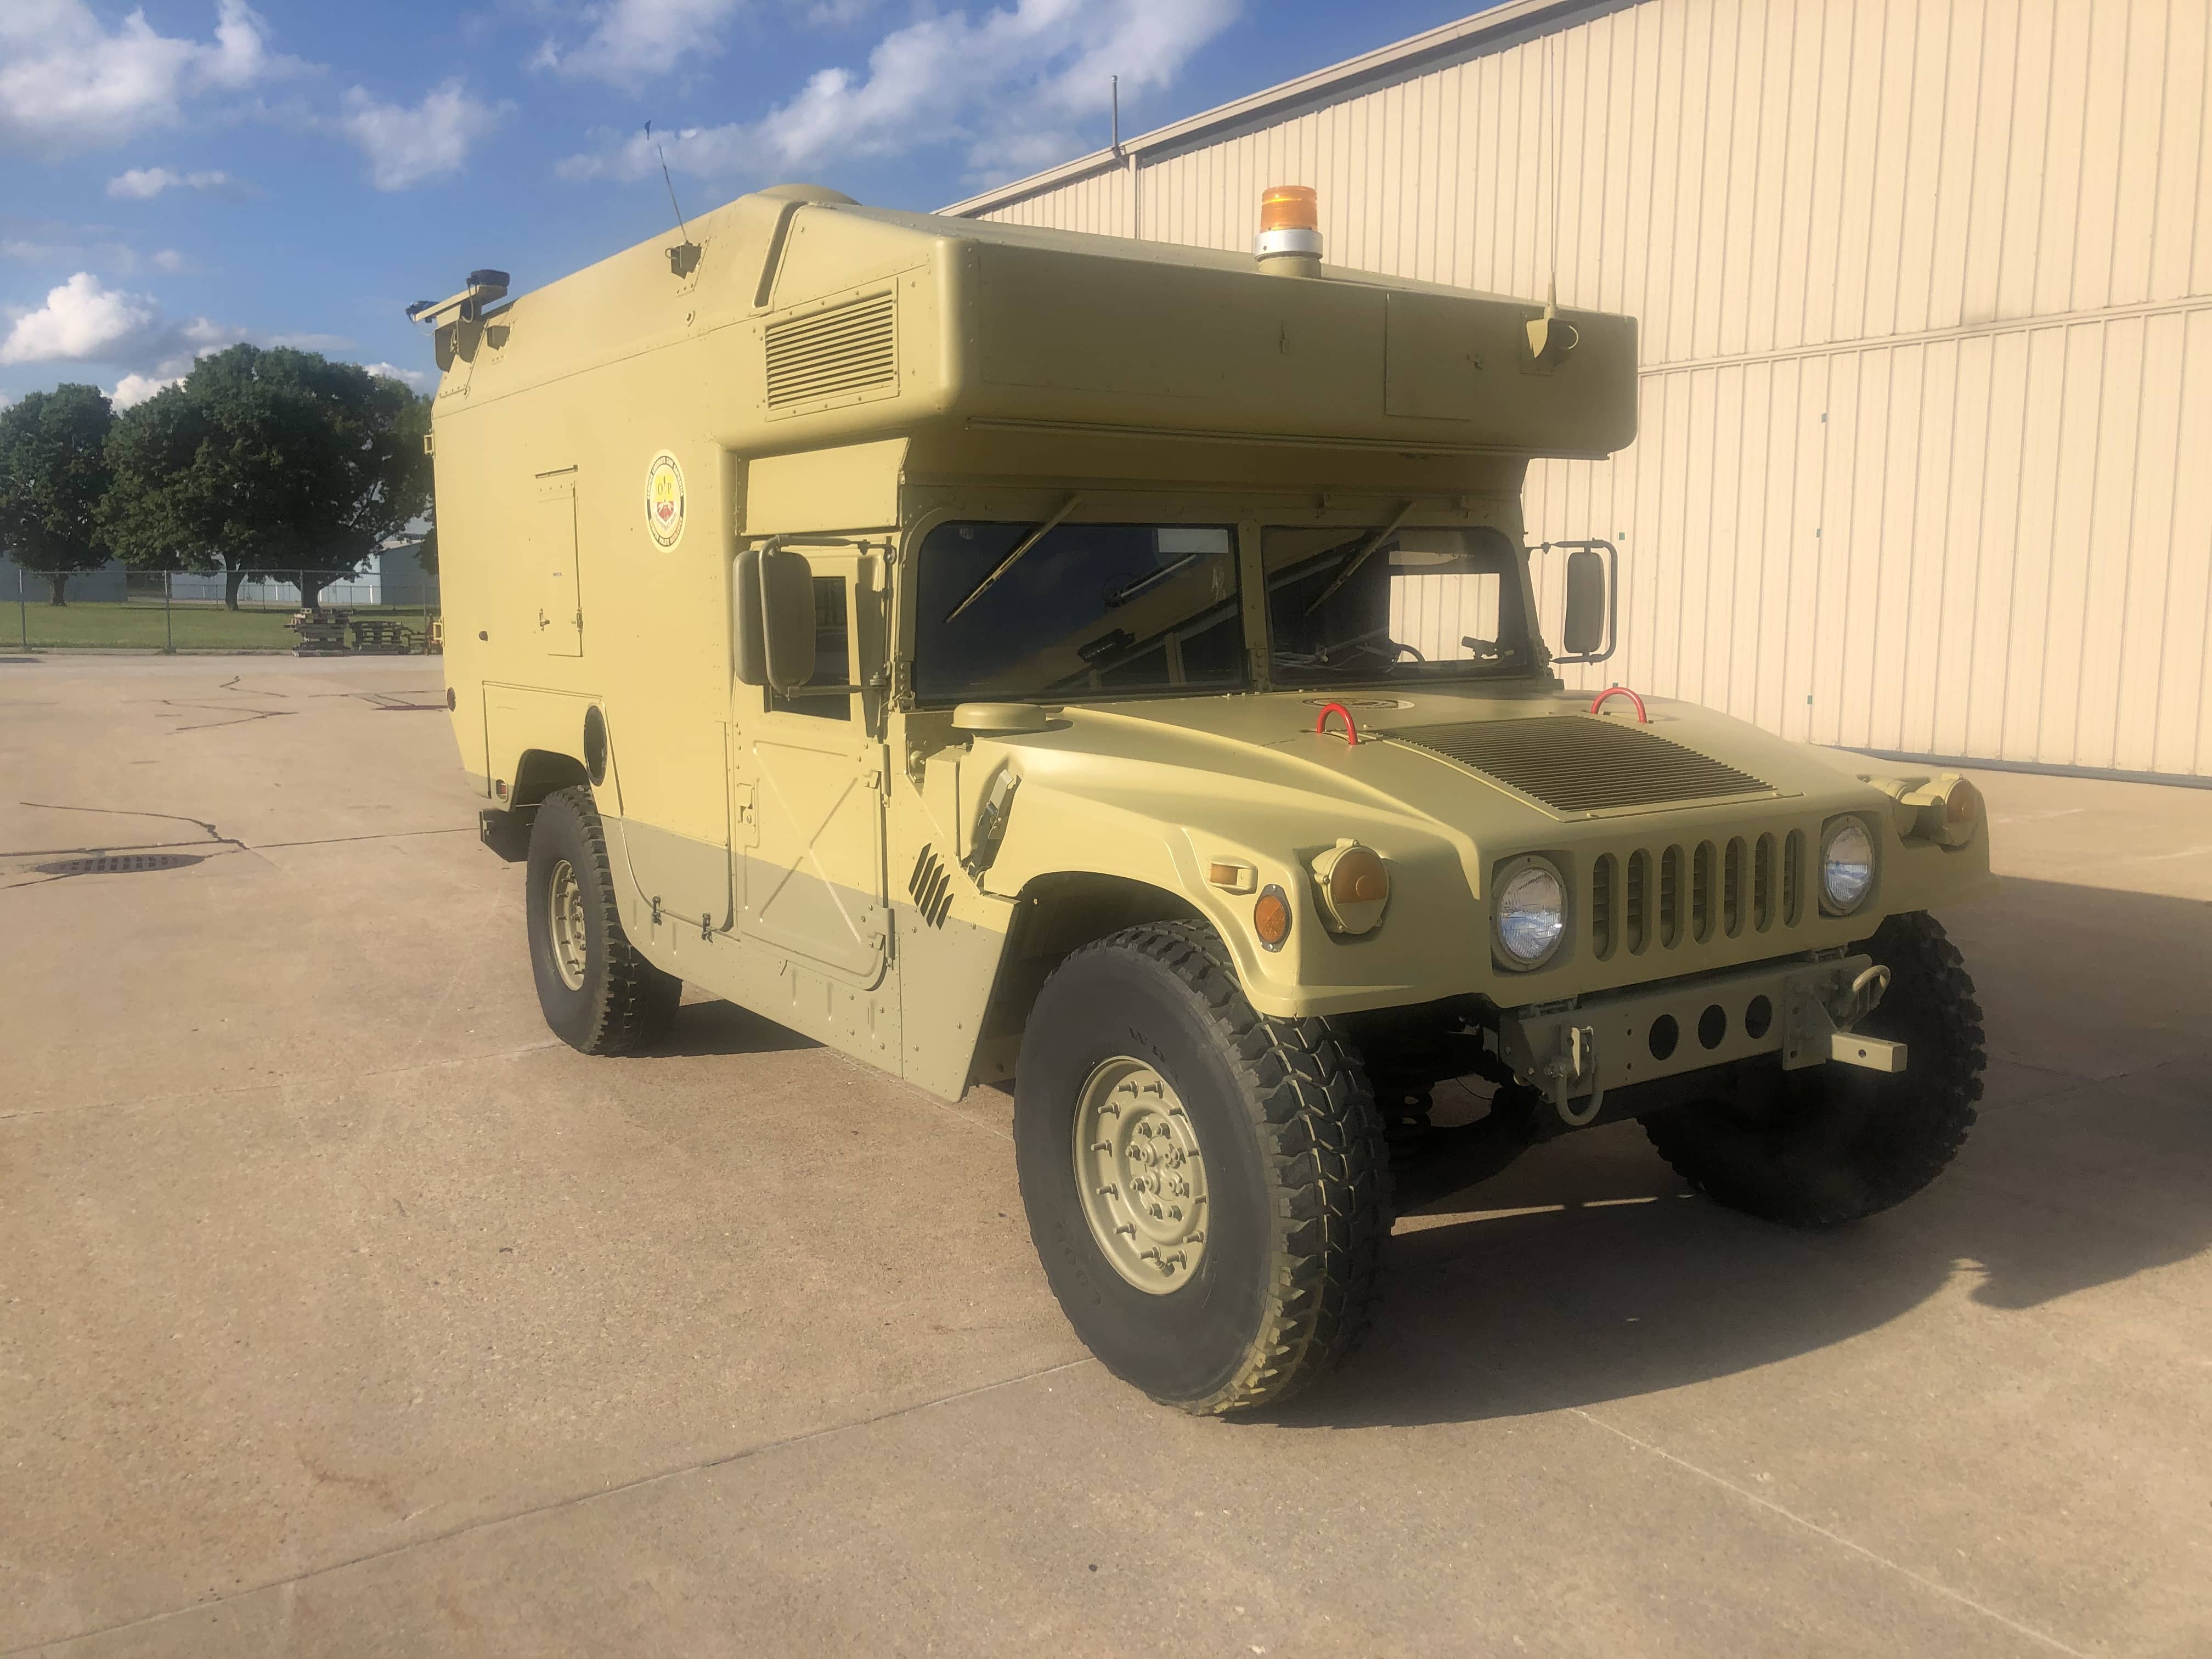 Side view of humvee research vehicle